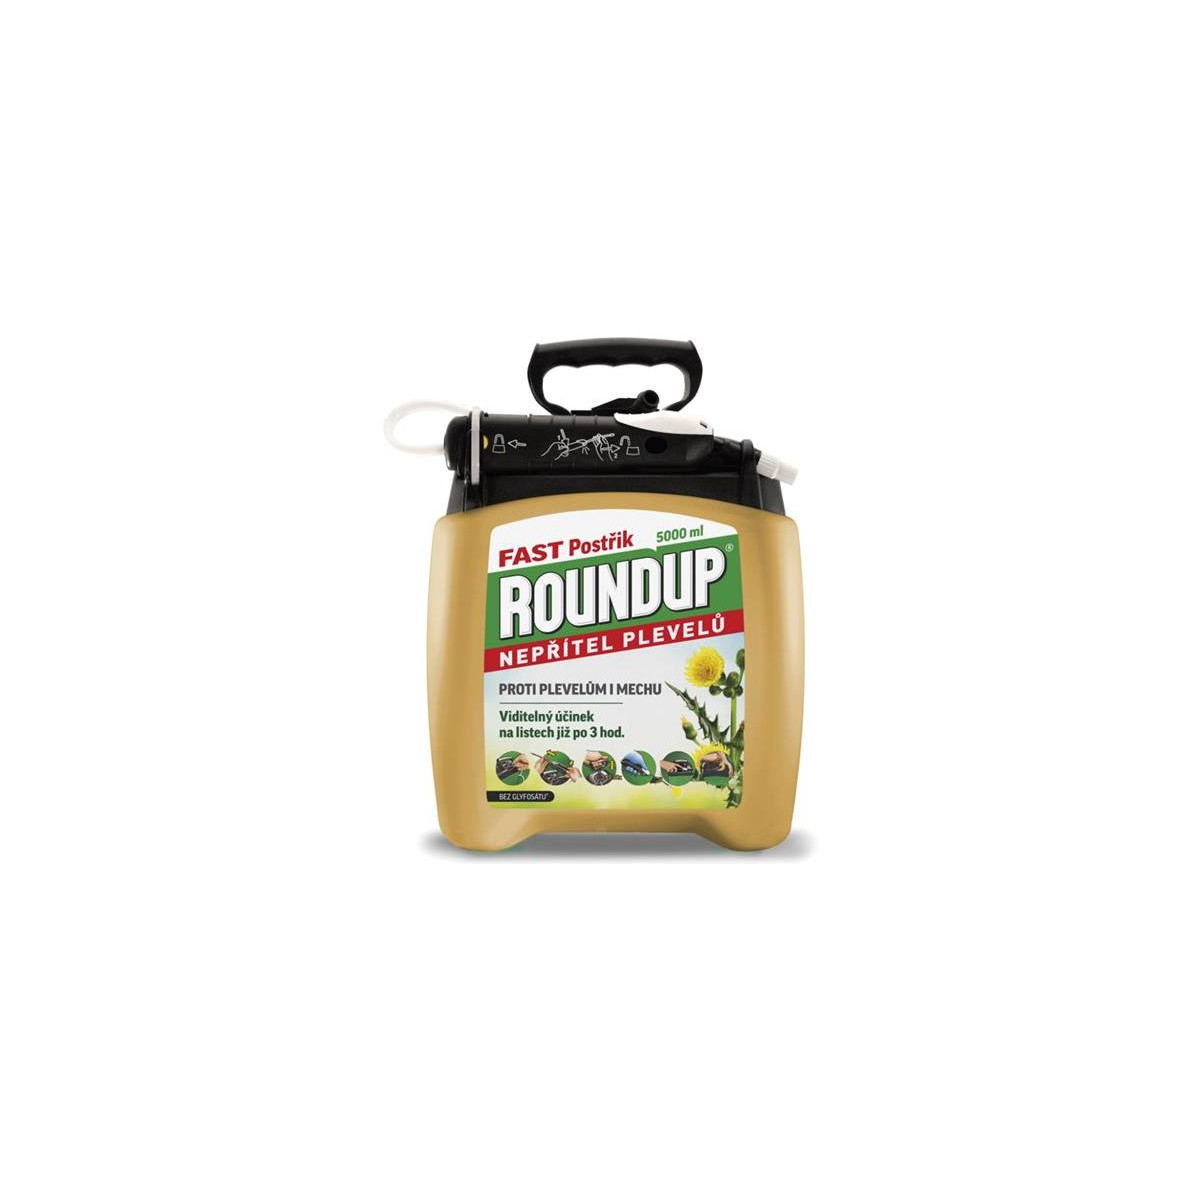 More about ROUNDUP Fast 5l